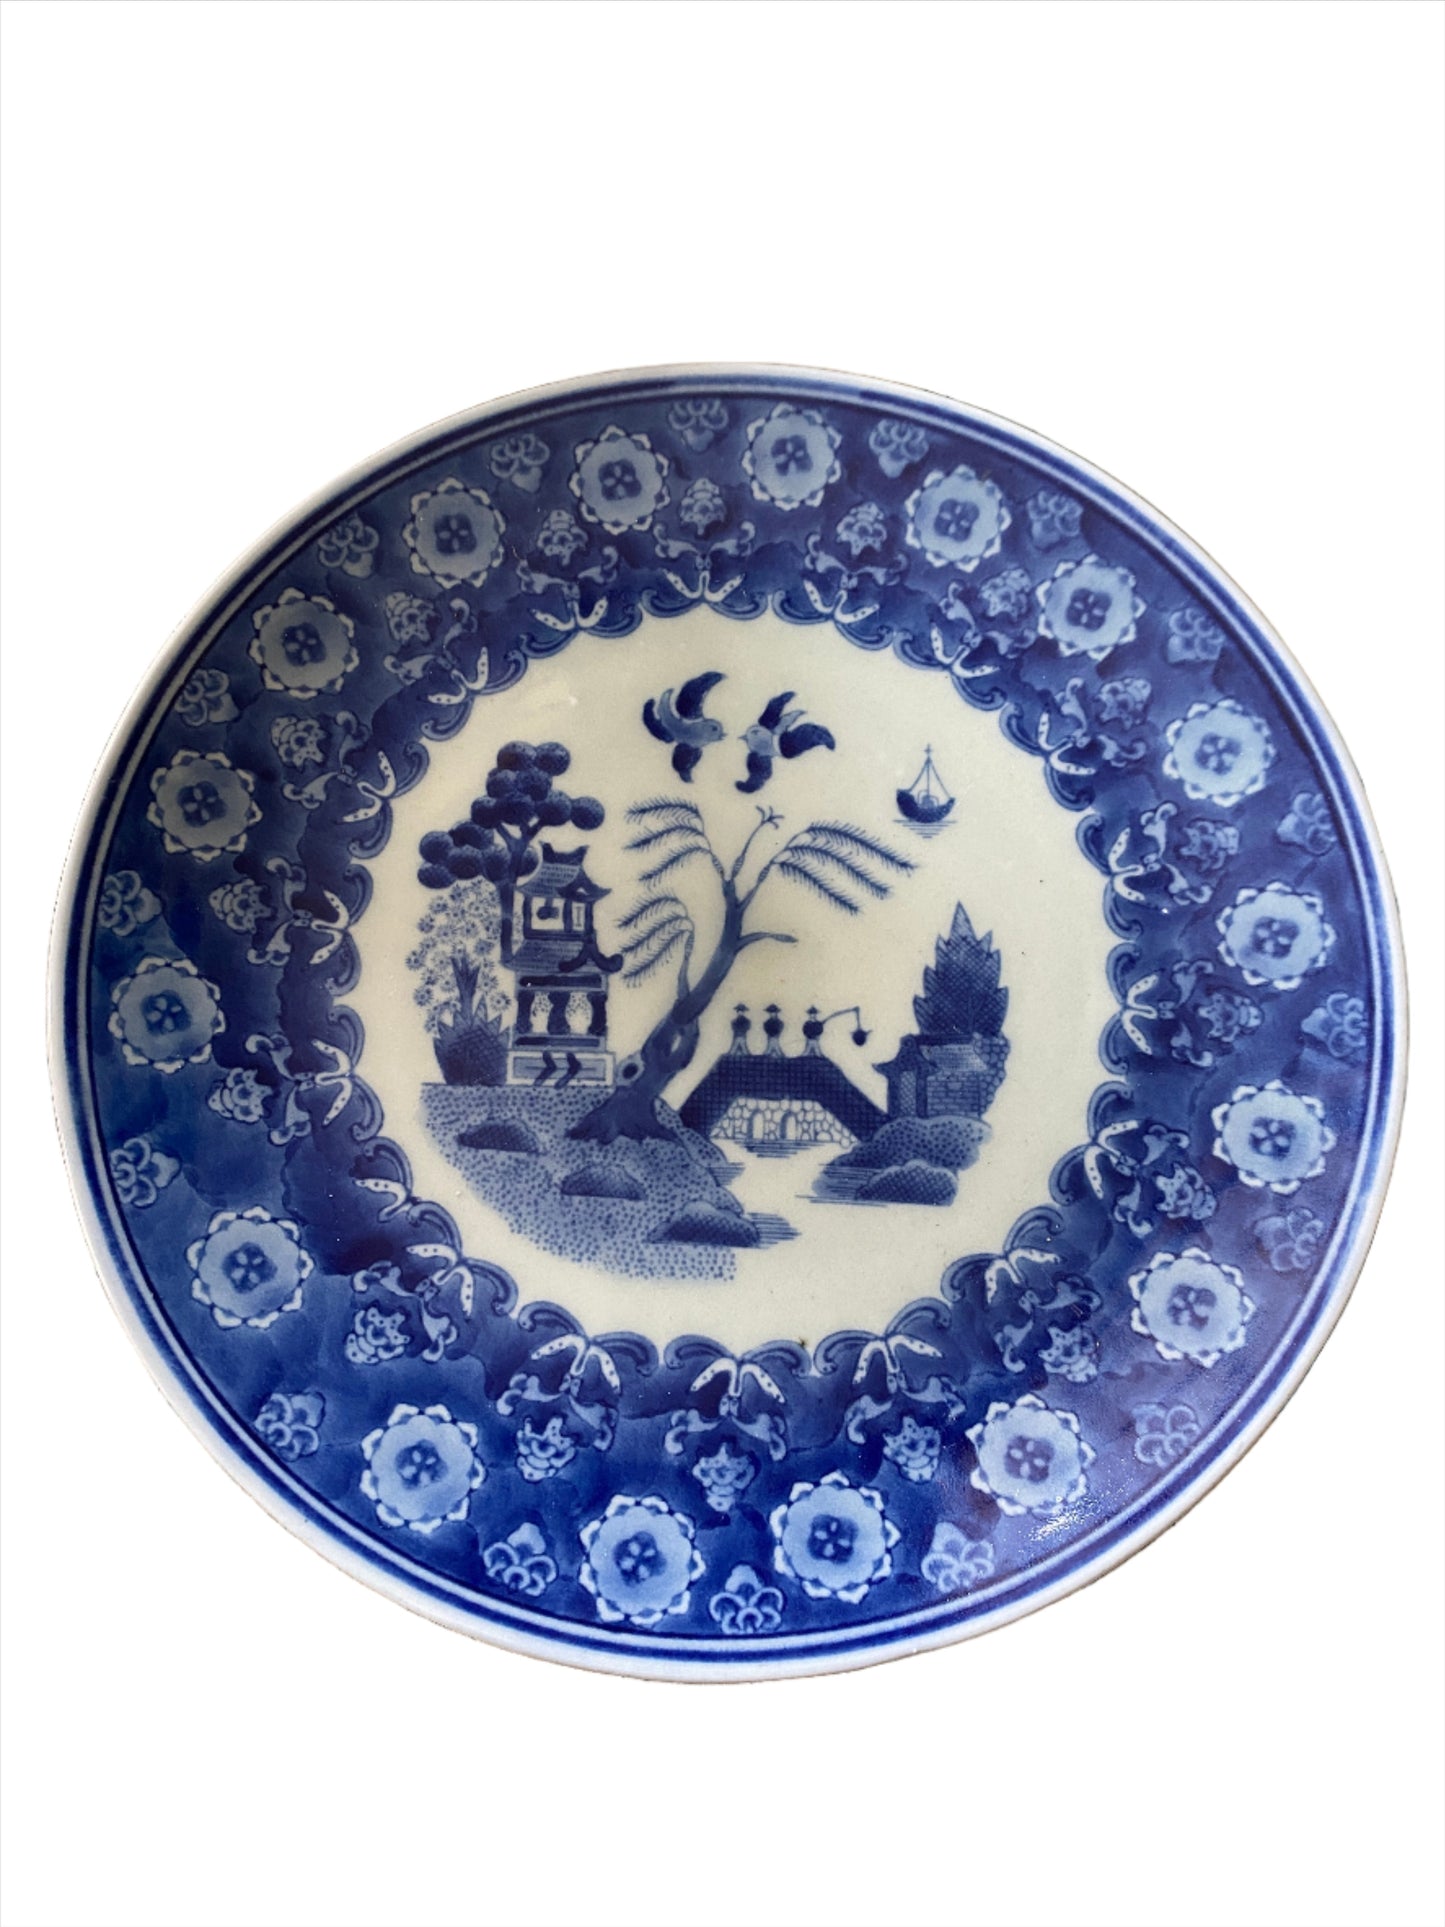 Blue and white display plate